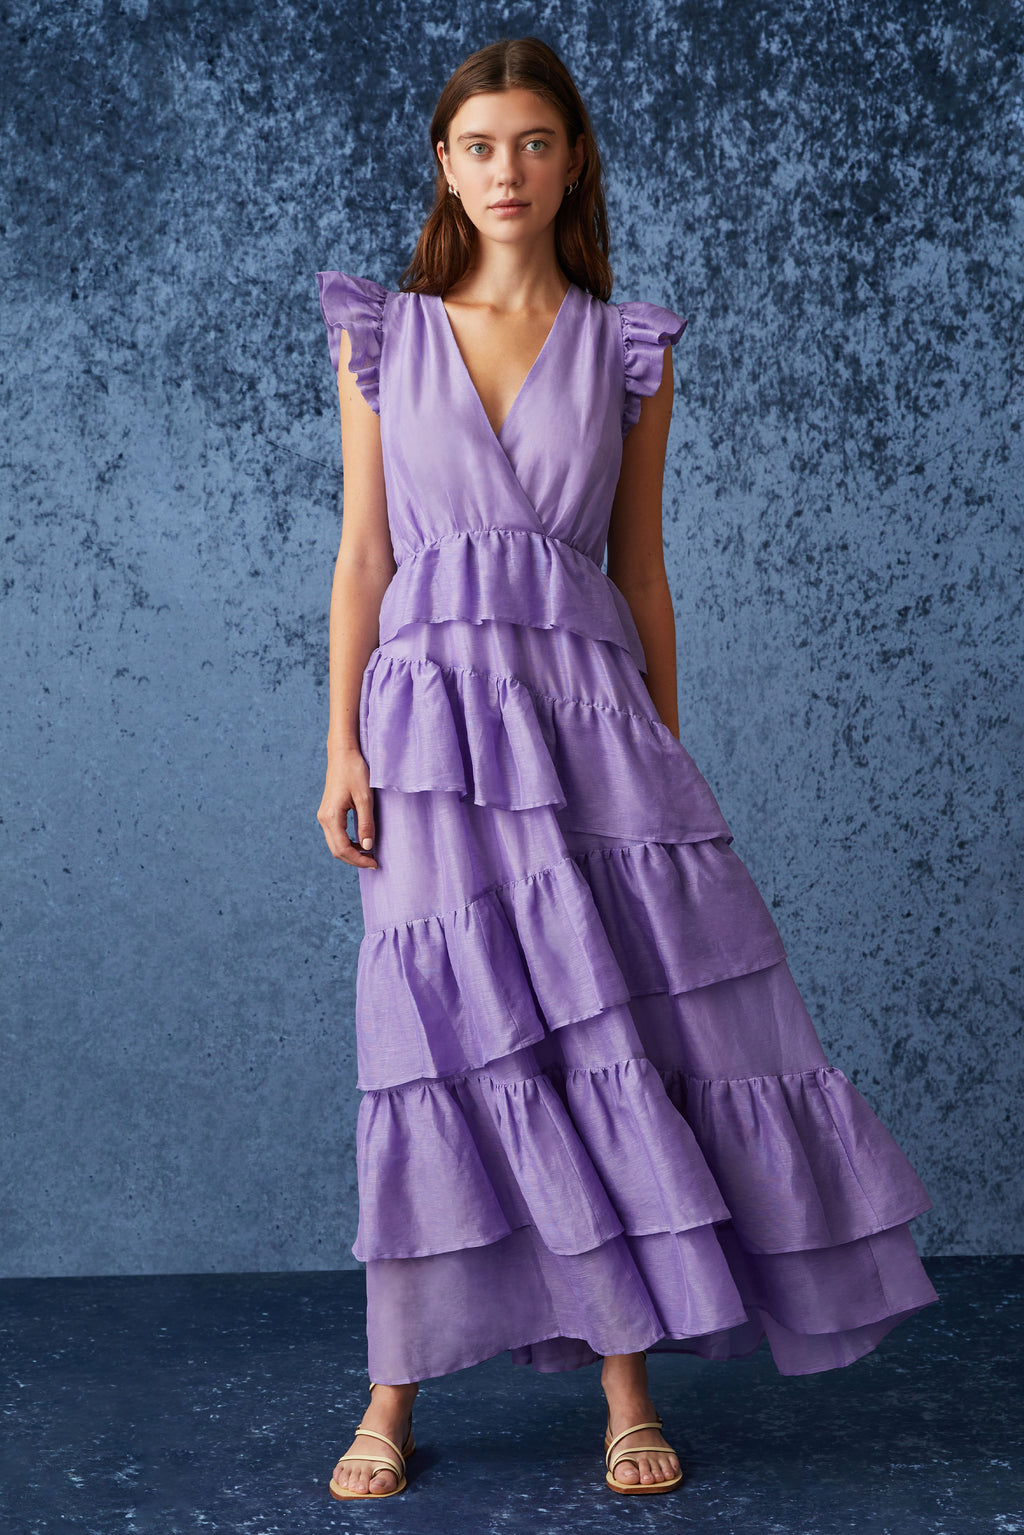 Solid light purple maxi dress with an asymmetrical tiered skirt